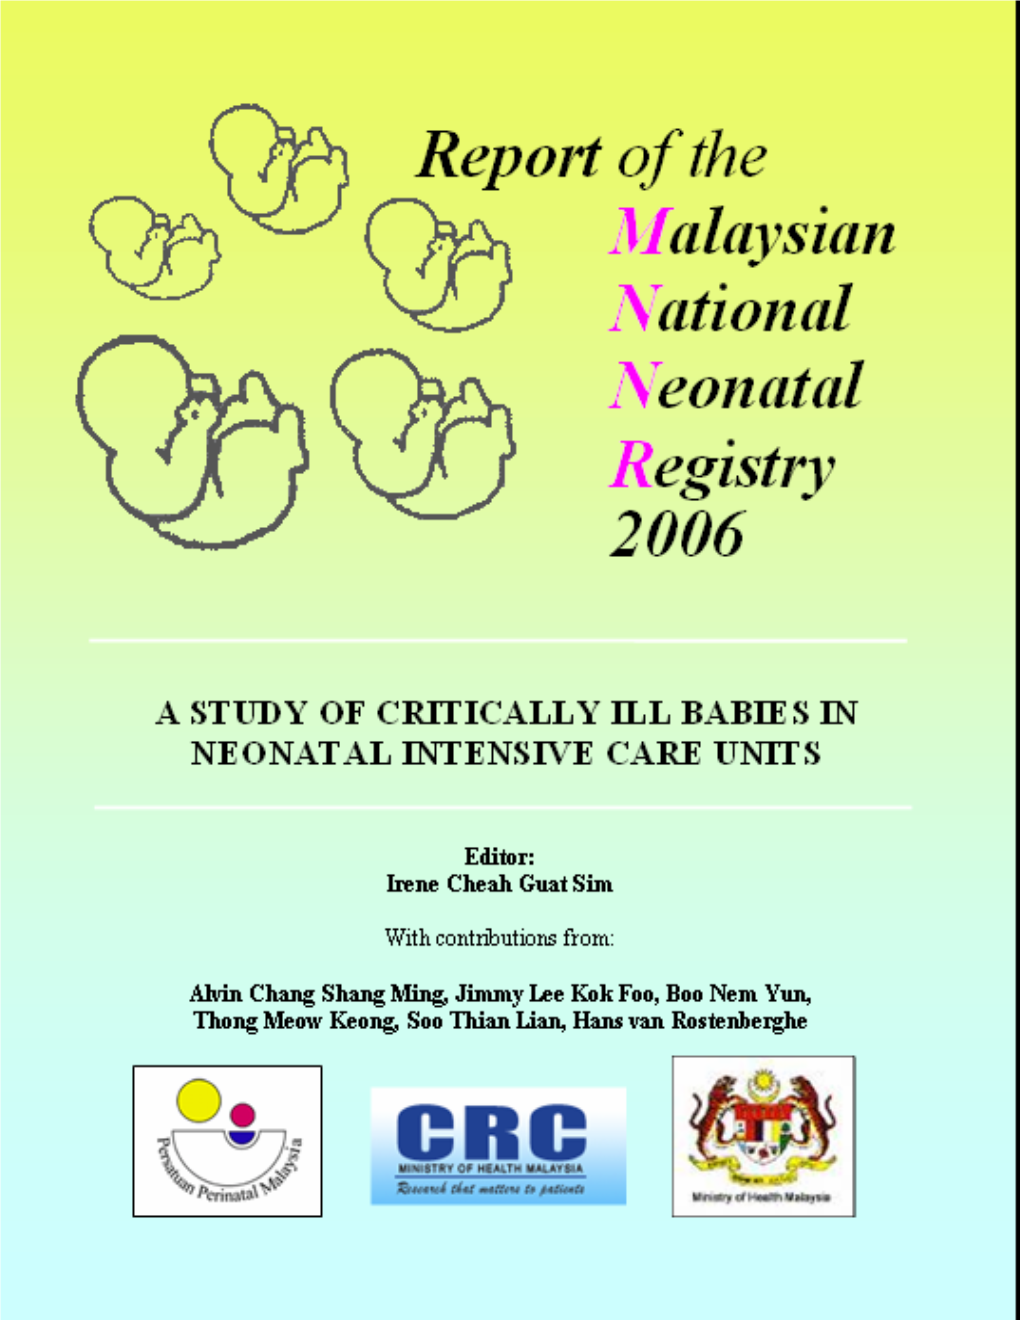 Report of the Malaysian National Neonatal Registry 2006